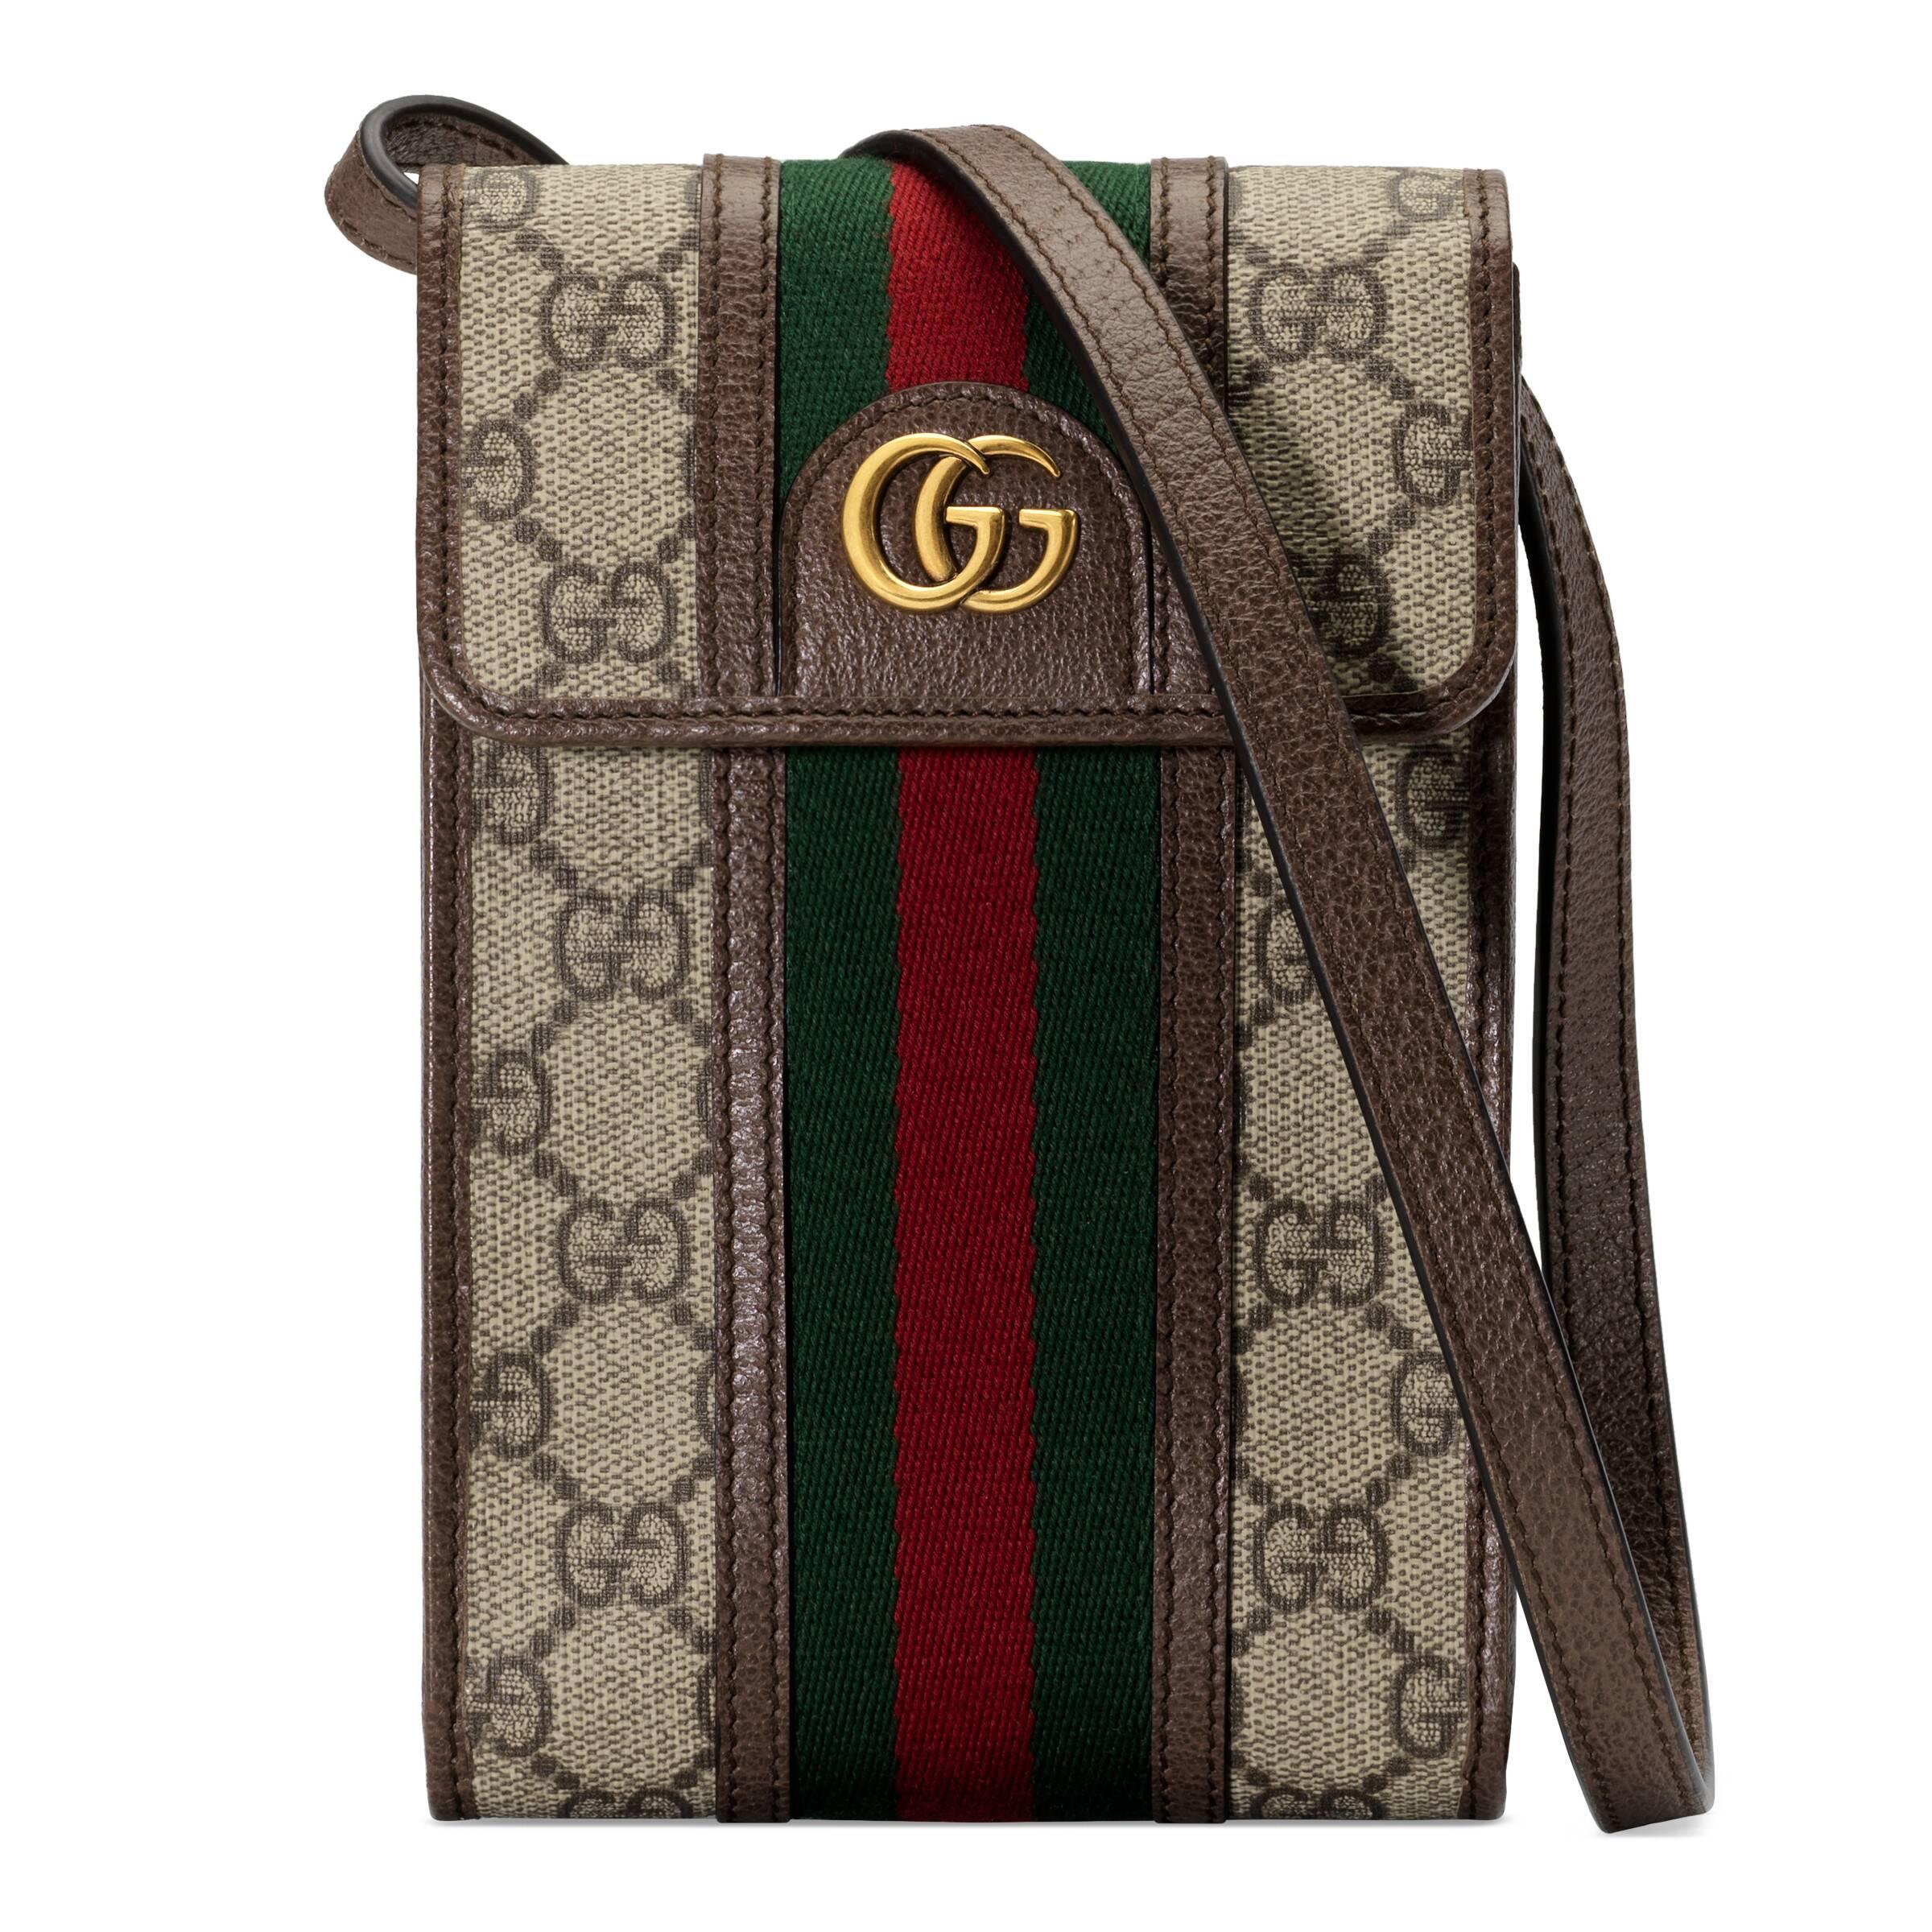 Gucci Canvas Ophidia GG Mini Bag in Beige (Natural) for Men - Lyst